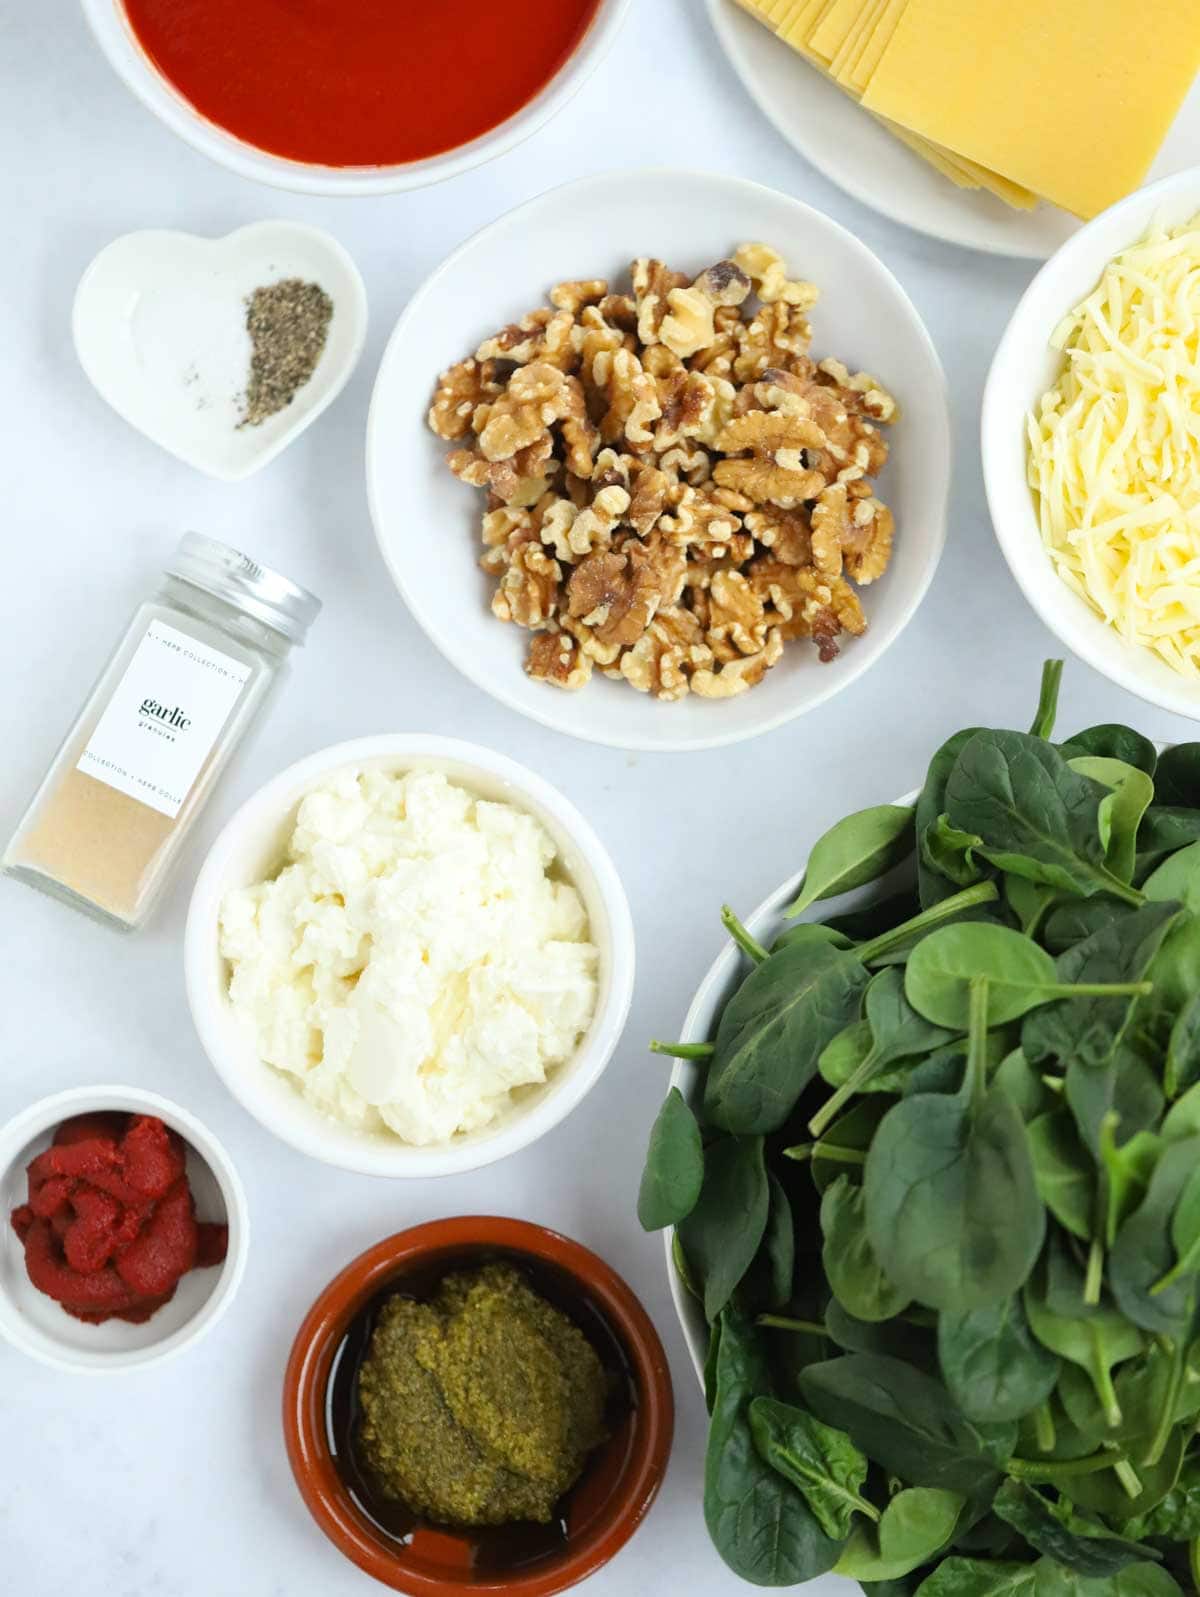 Ingredients to make spinach and ricotta lasagne.